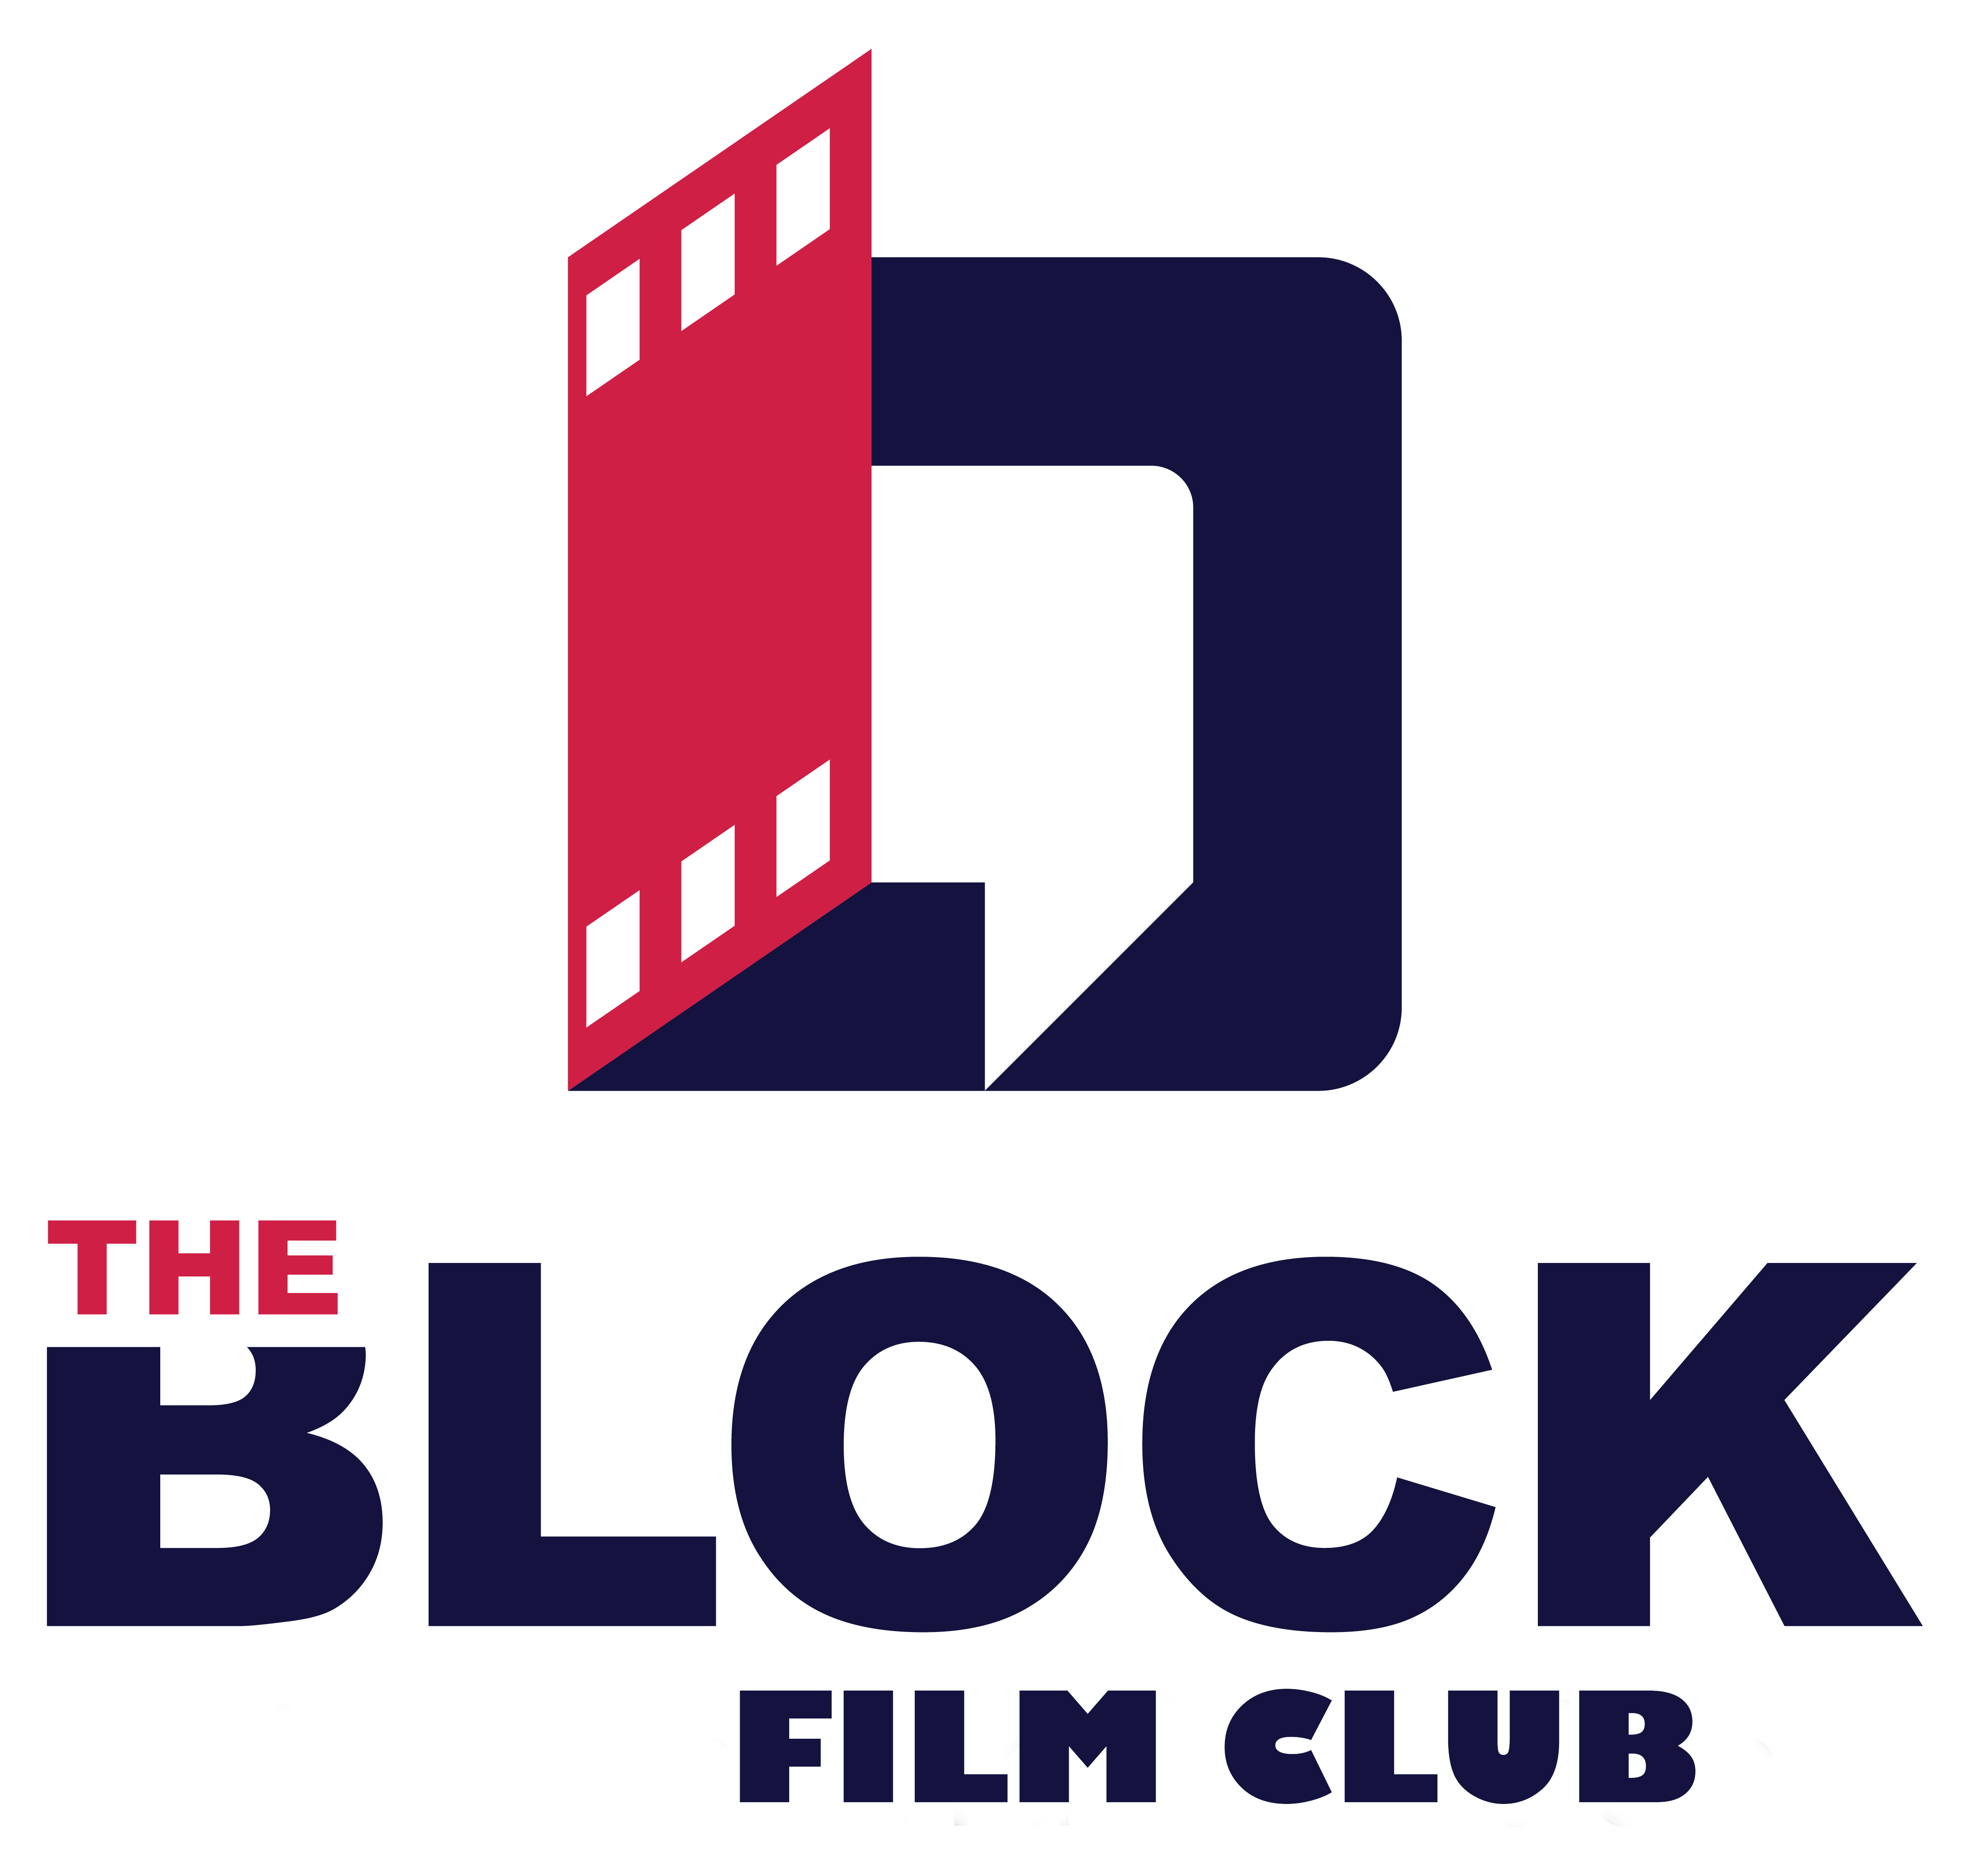 JOINT FILM CLUB MEMBERSHIP AND REGISTRATION FEE 